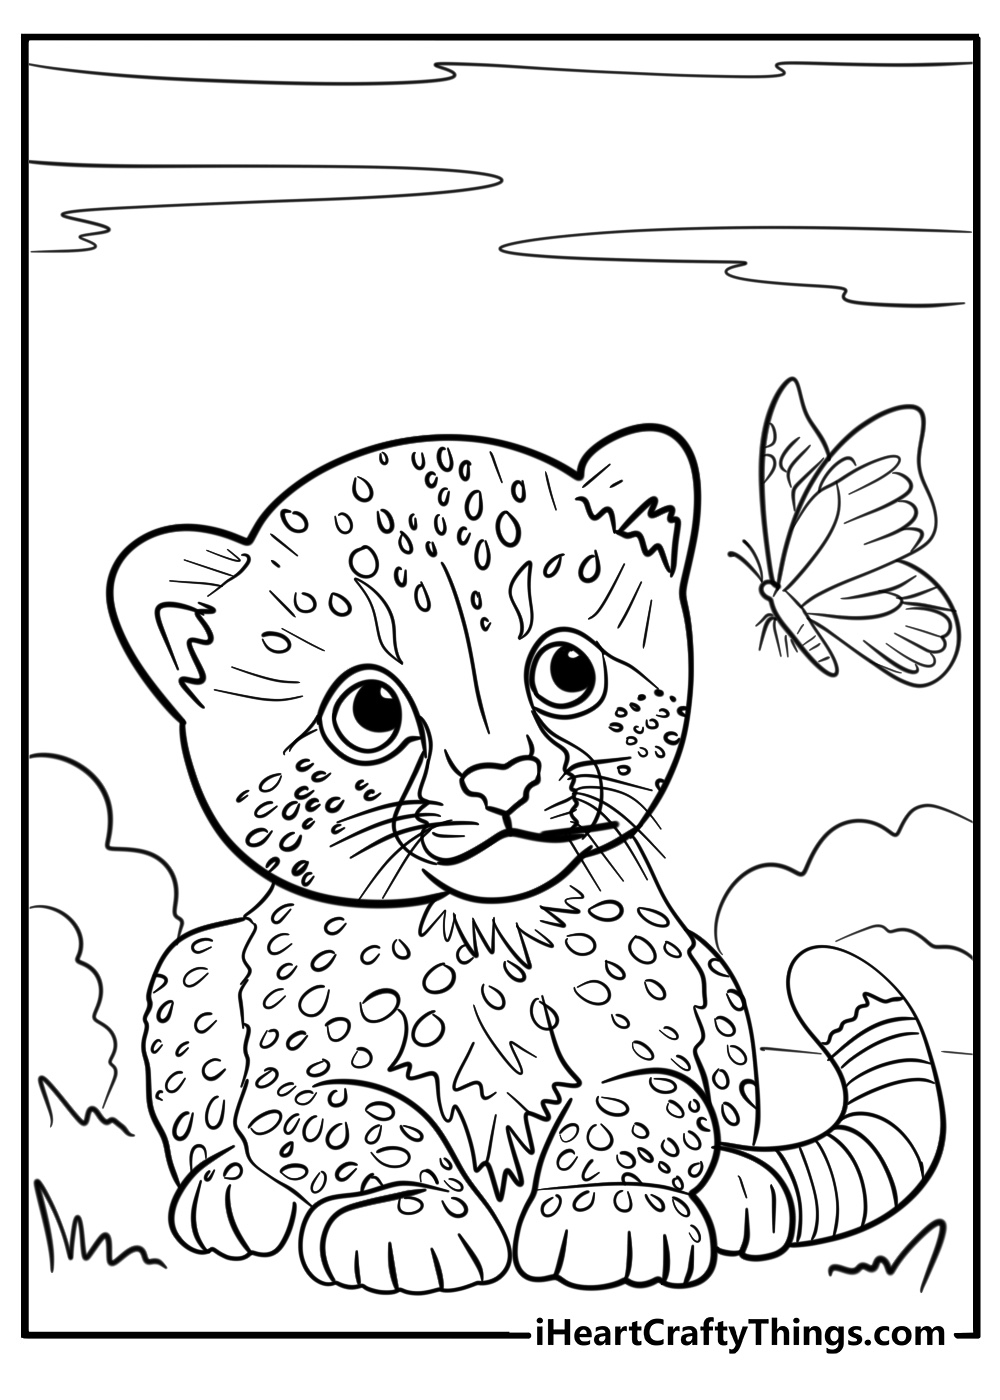 Cute animals coloring page of cheetah watching a butterfly